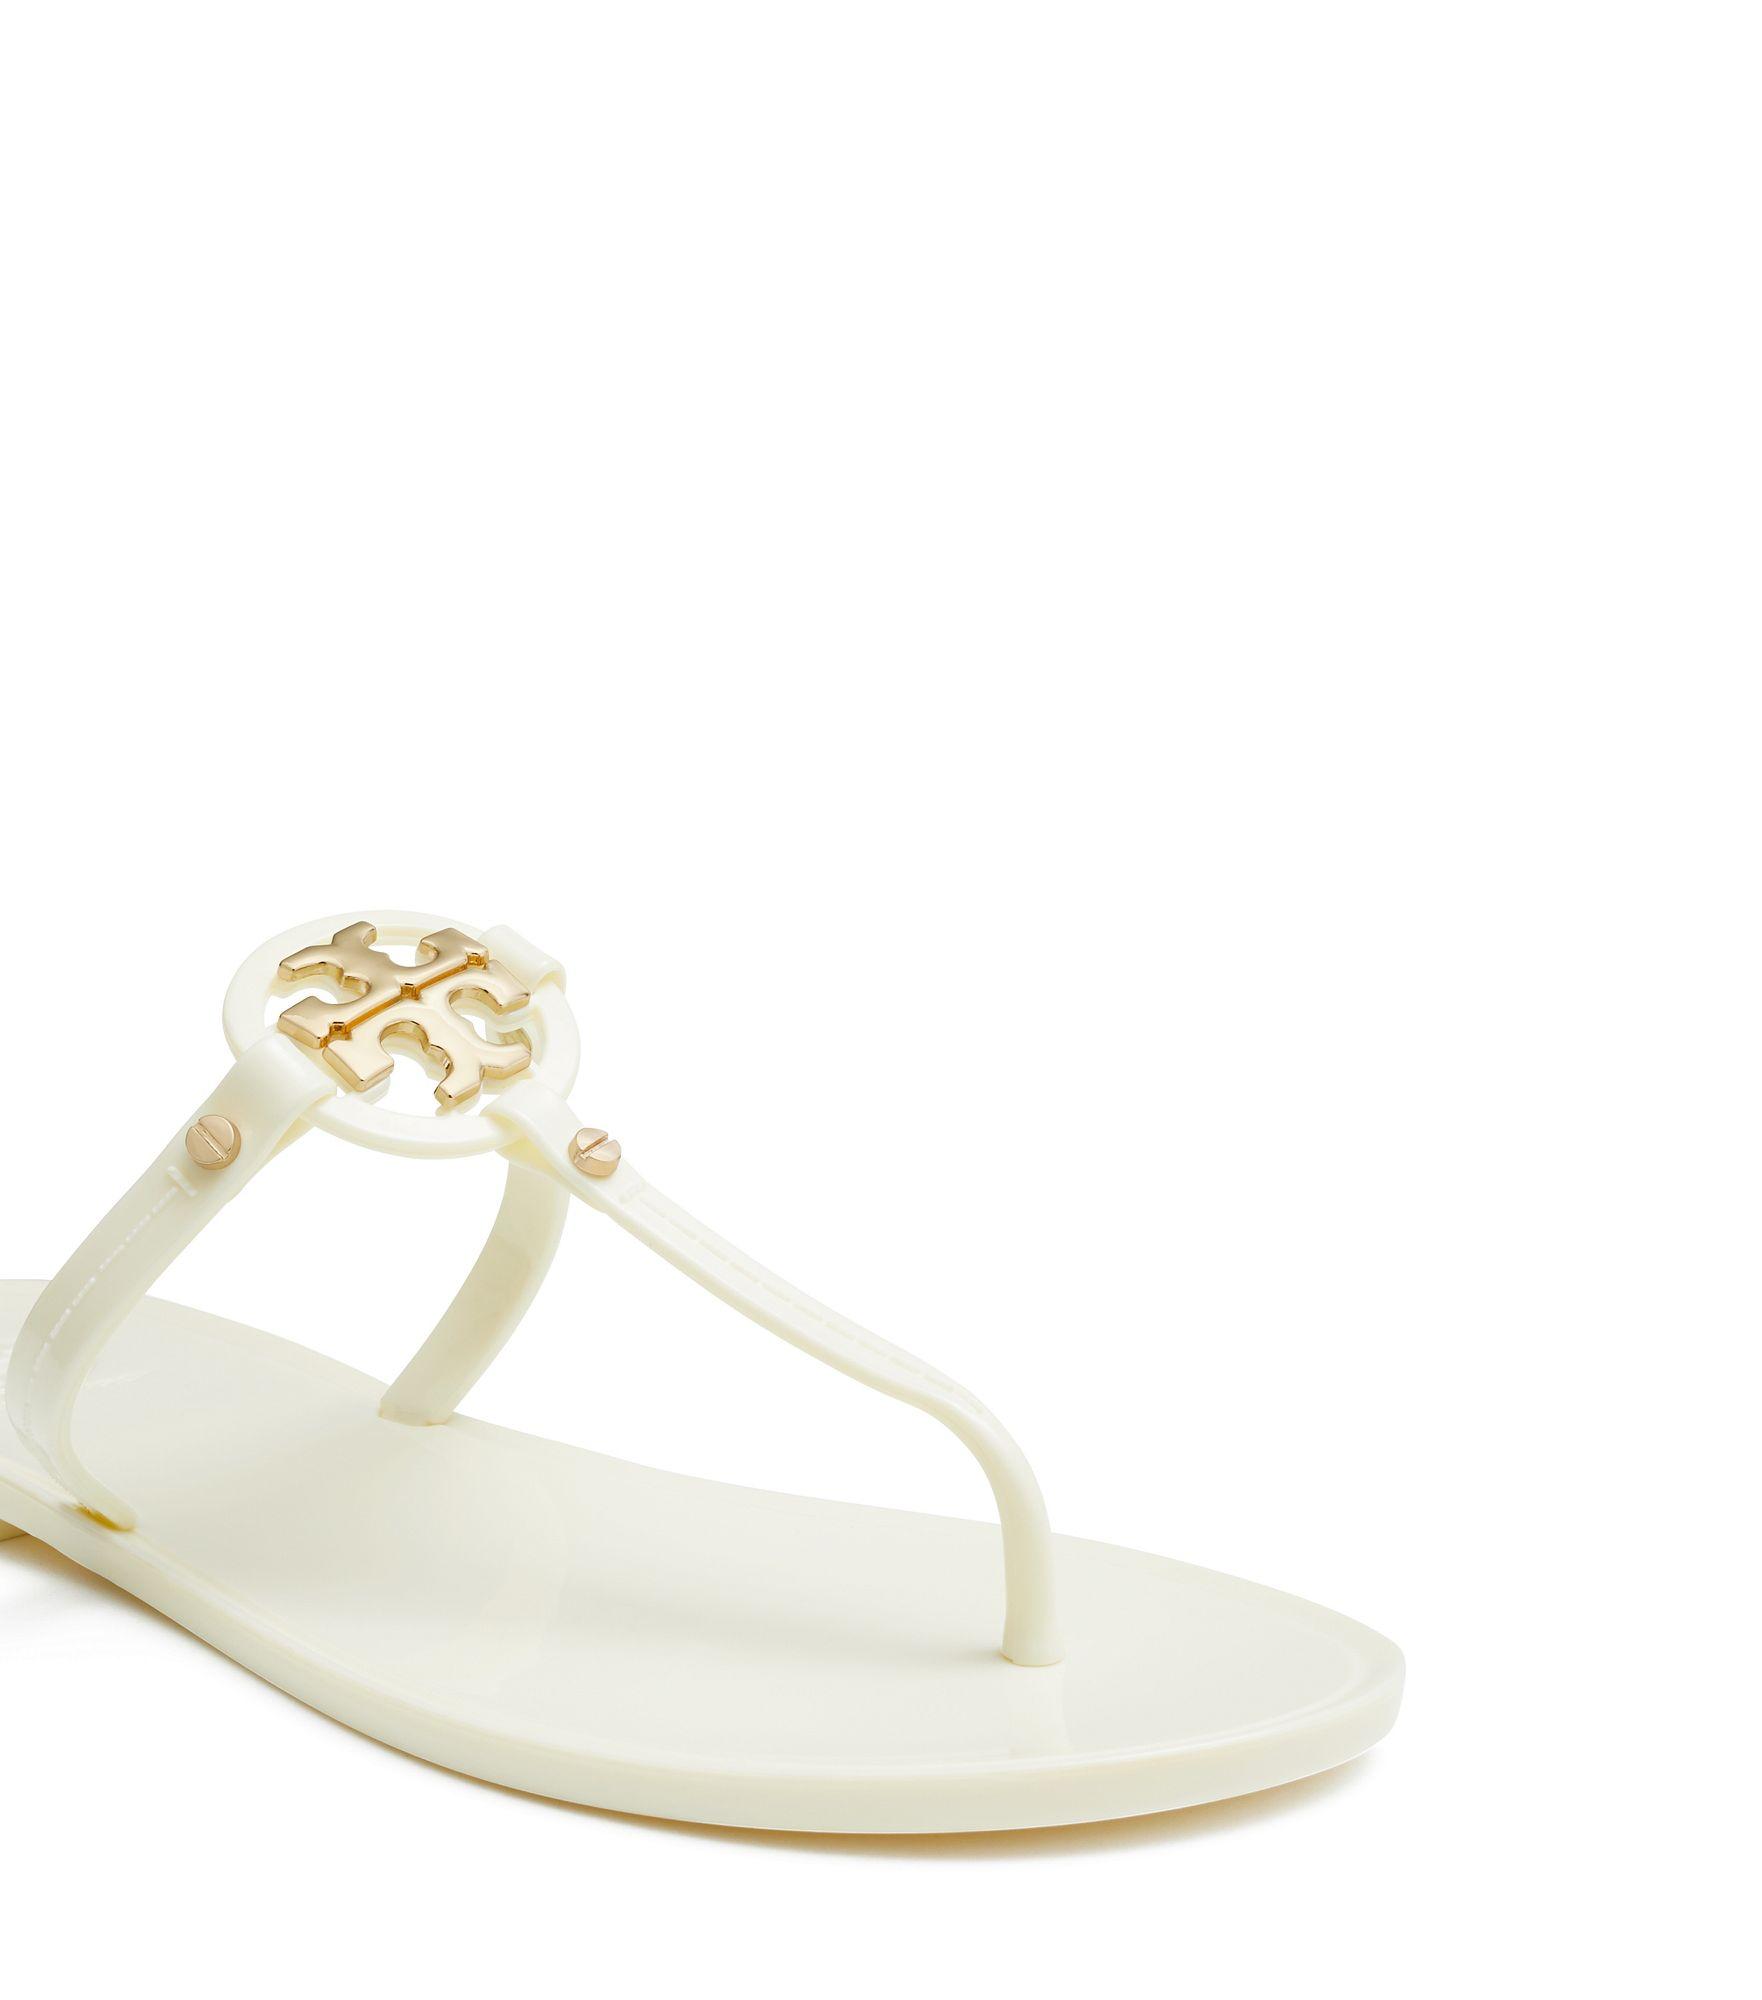 Tory Burch Mini Miller Jelly Thong Sandals in White - Lyst